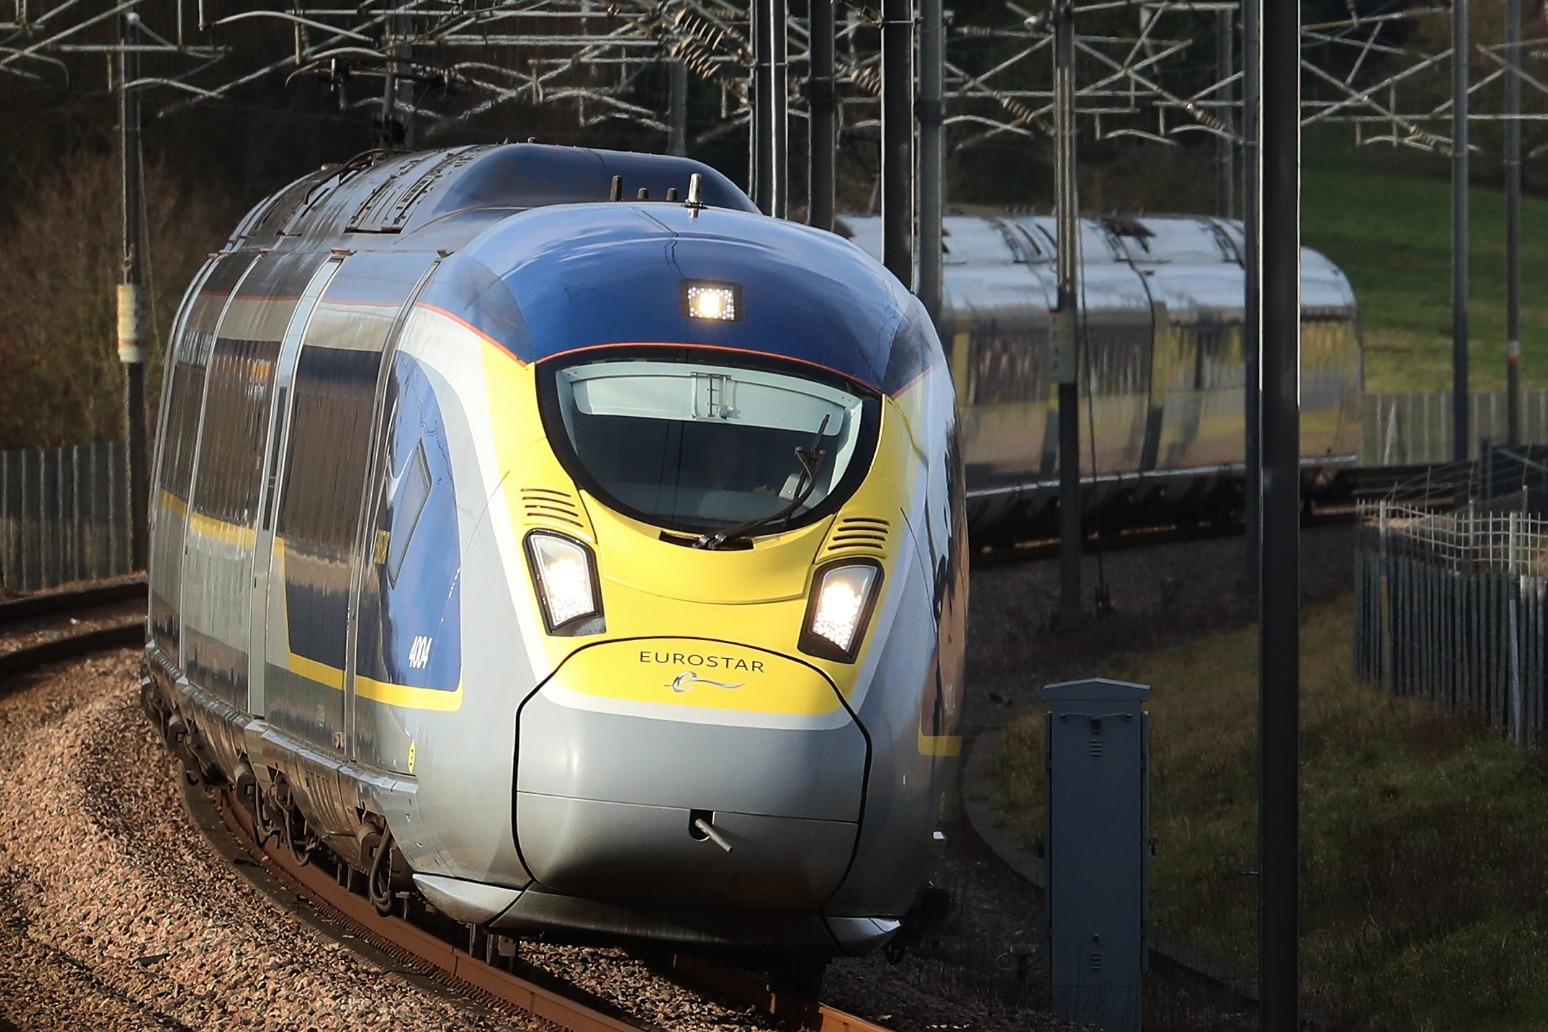 Support rail travel by charging fair price for carbon emissions 